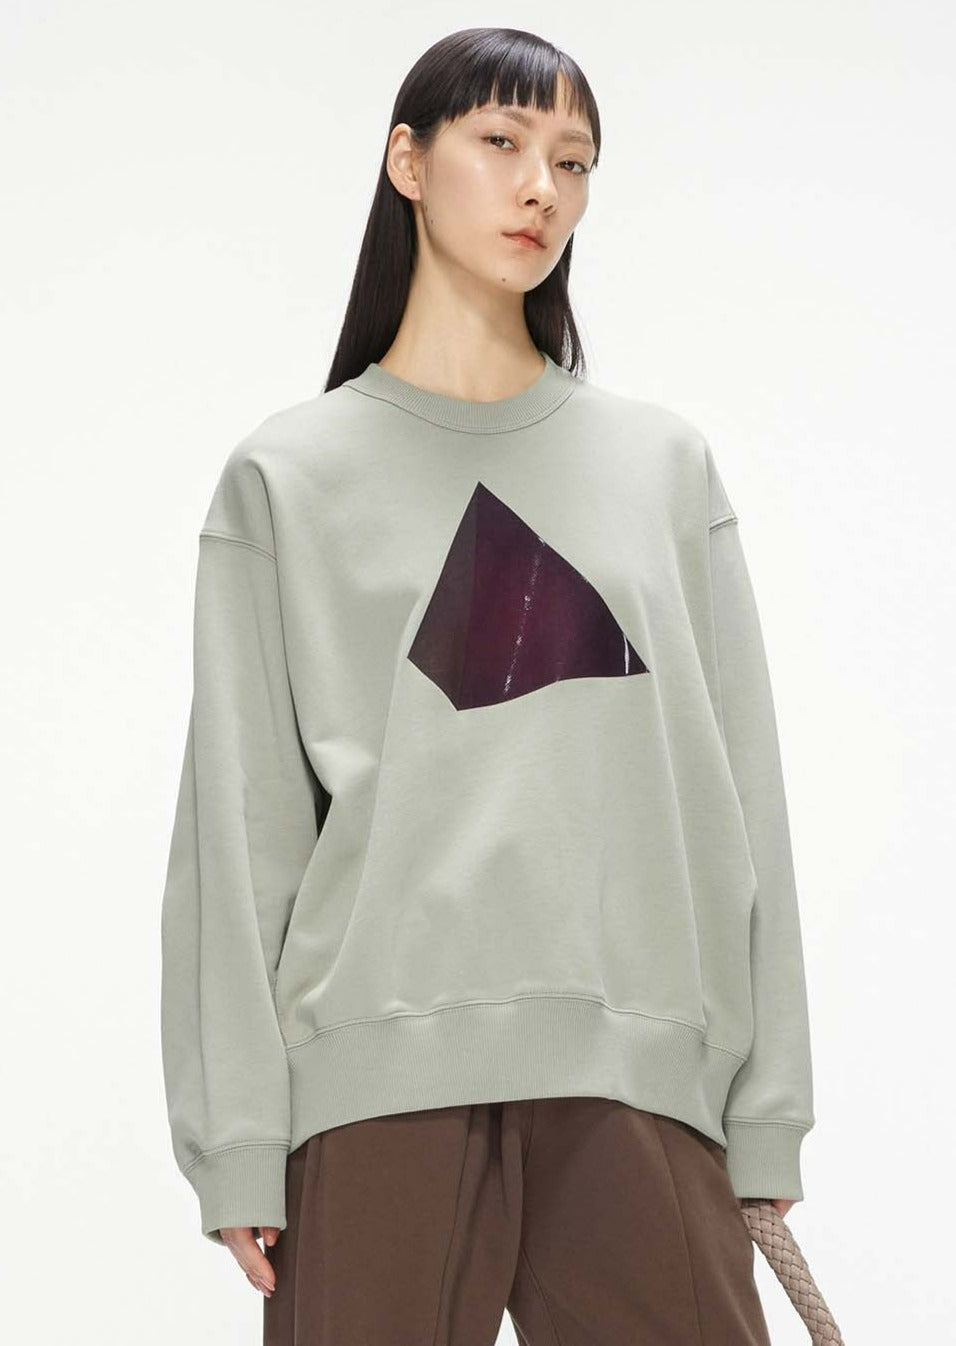 Sweaters / JNBY Loose Fit Pyramid Print Long Sleeve Crewneck Pullover